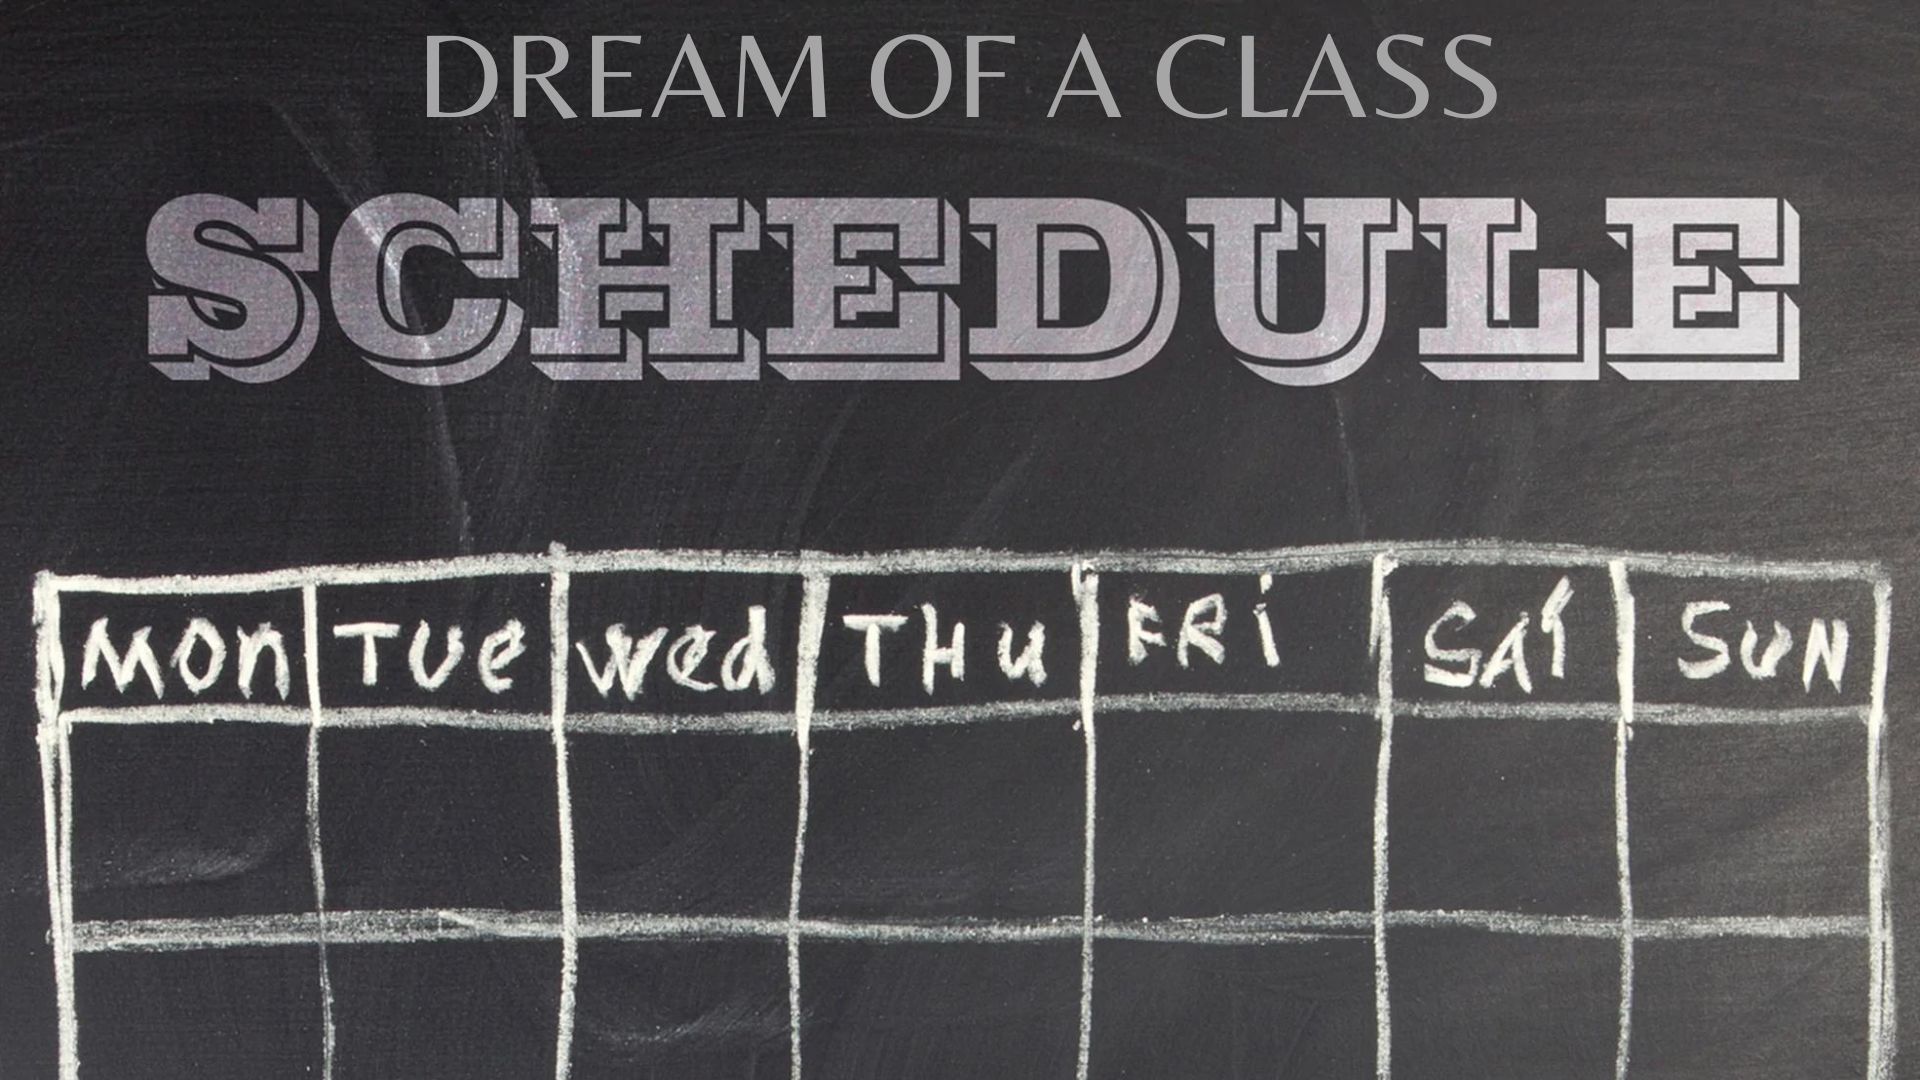 Dream Of A Class Schedule - Represents A Plan Of Action, Agenda, Or Goals